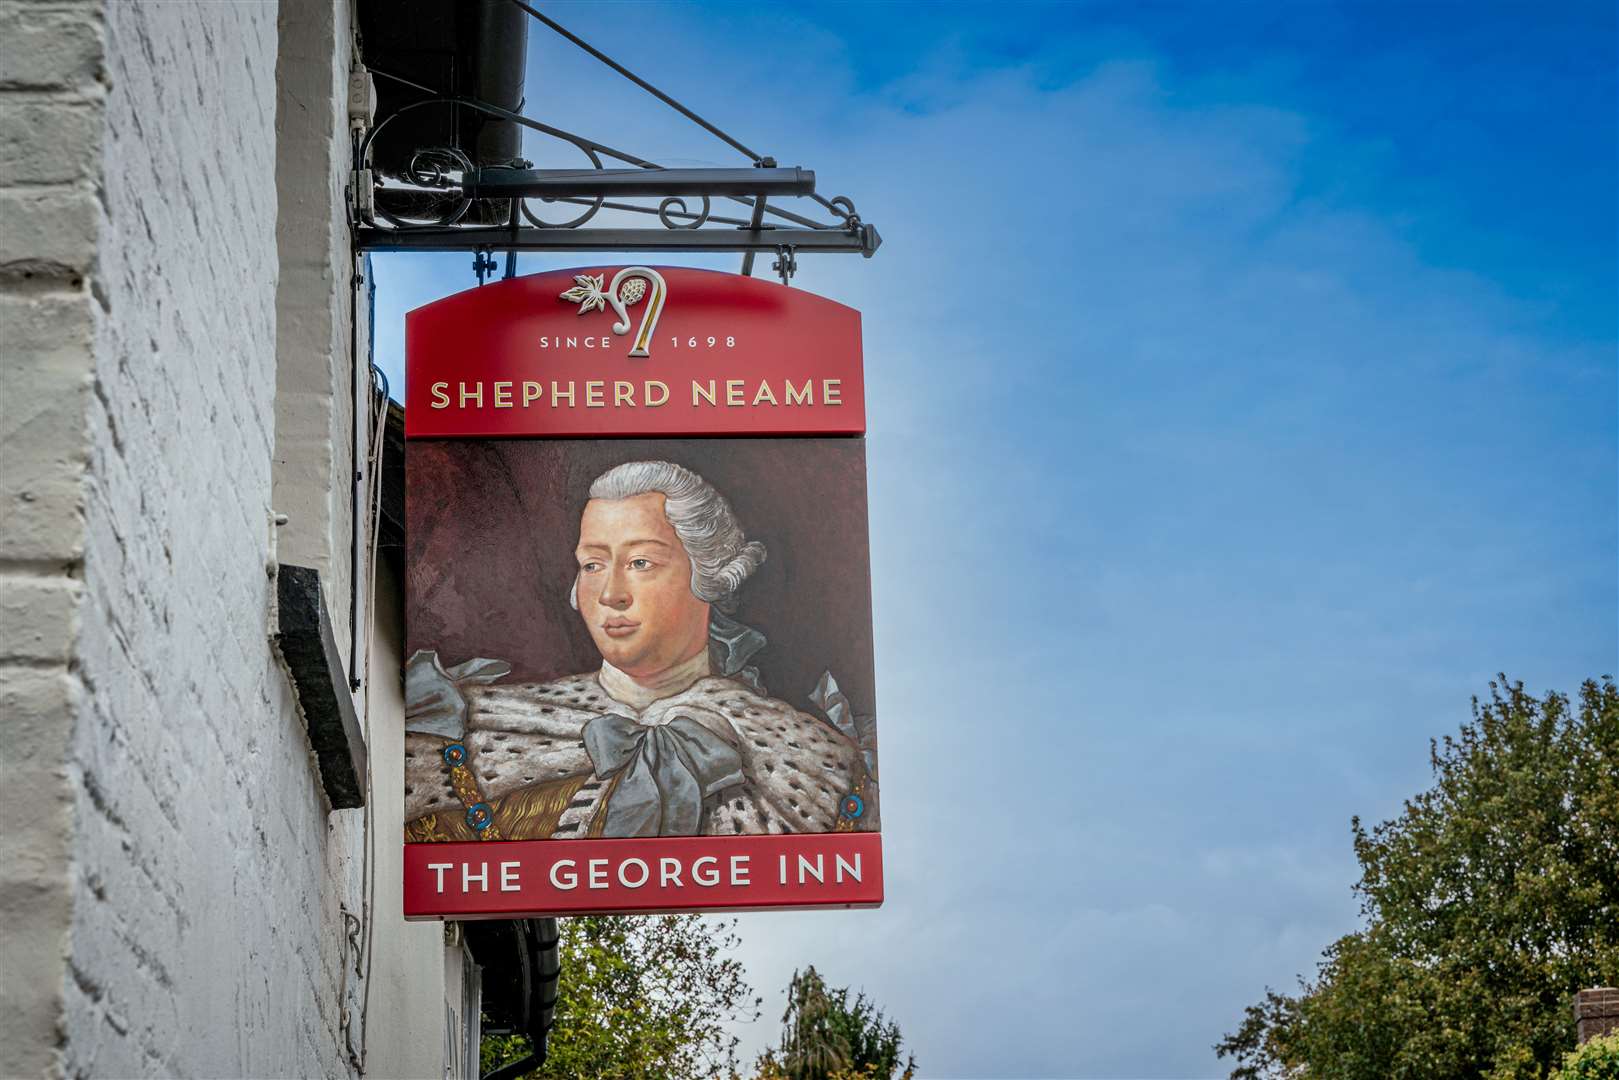 They are looking for a new licensee to take over. Picture: Shepherd Neame